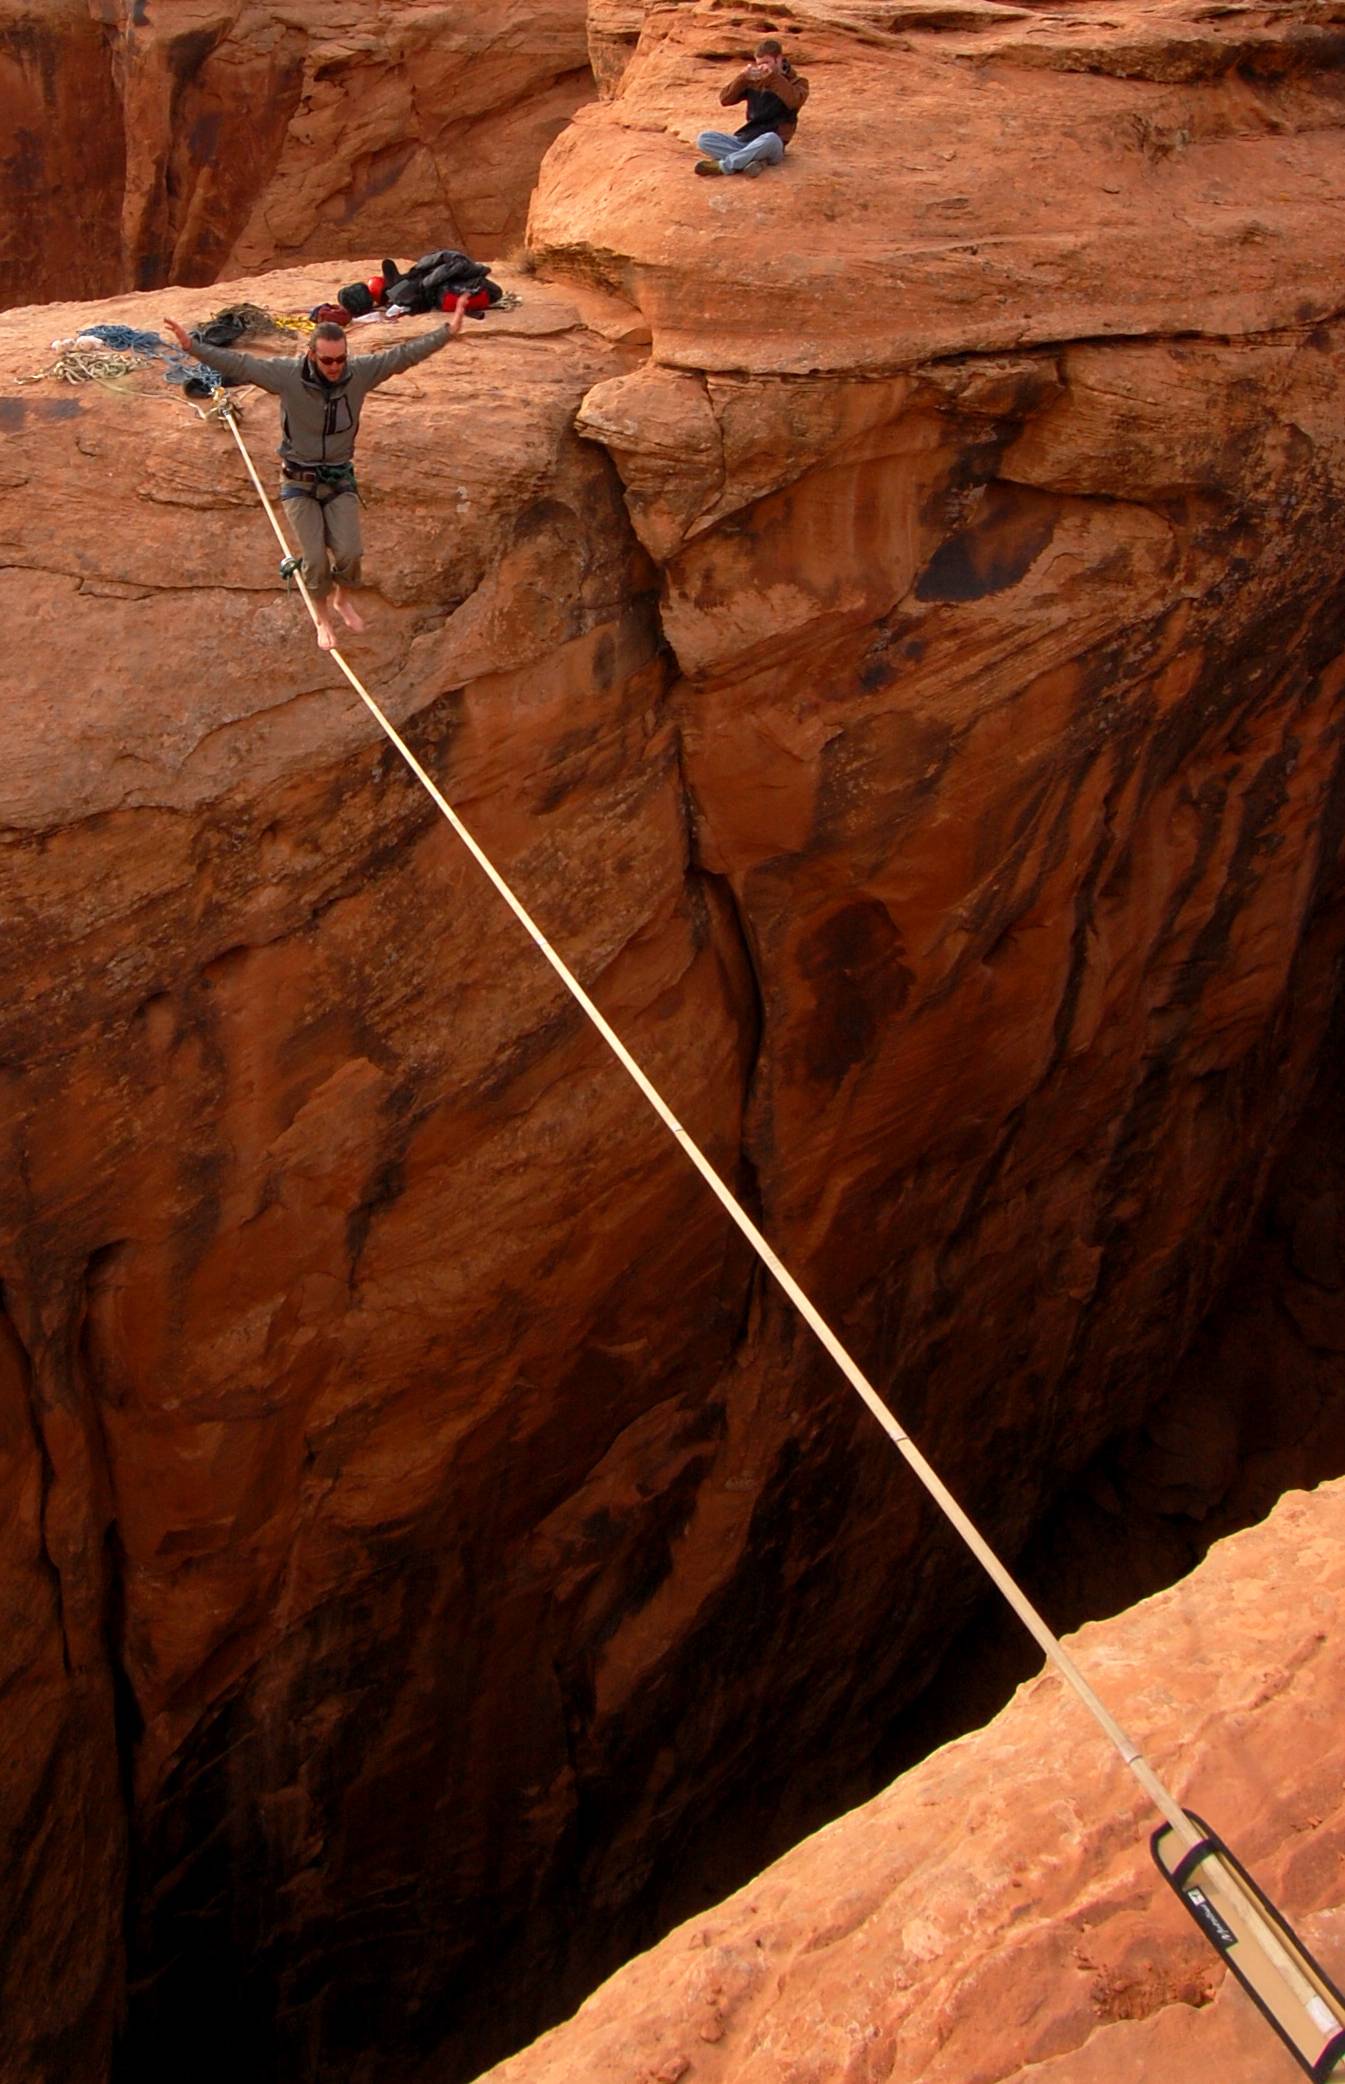 Me slacklining across the Birthday Gap in Arches National